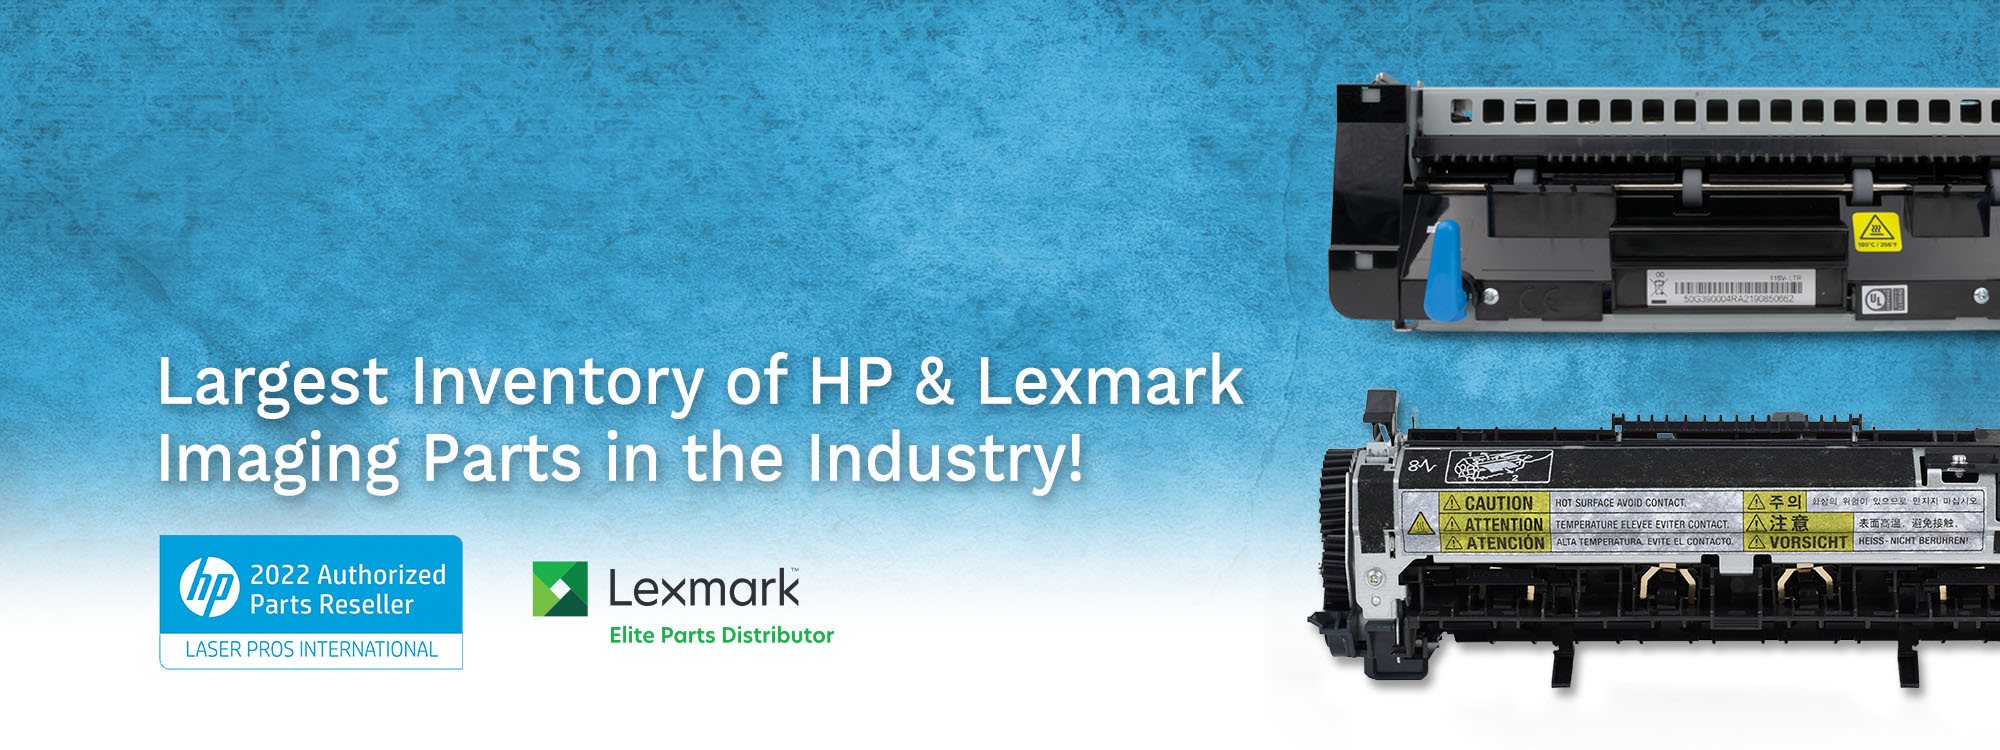 Largest Inventory of HP and Lexmark in the Industry